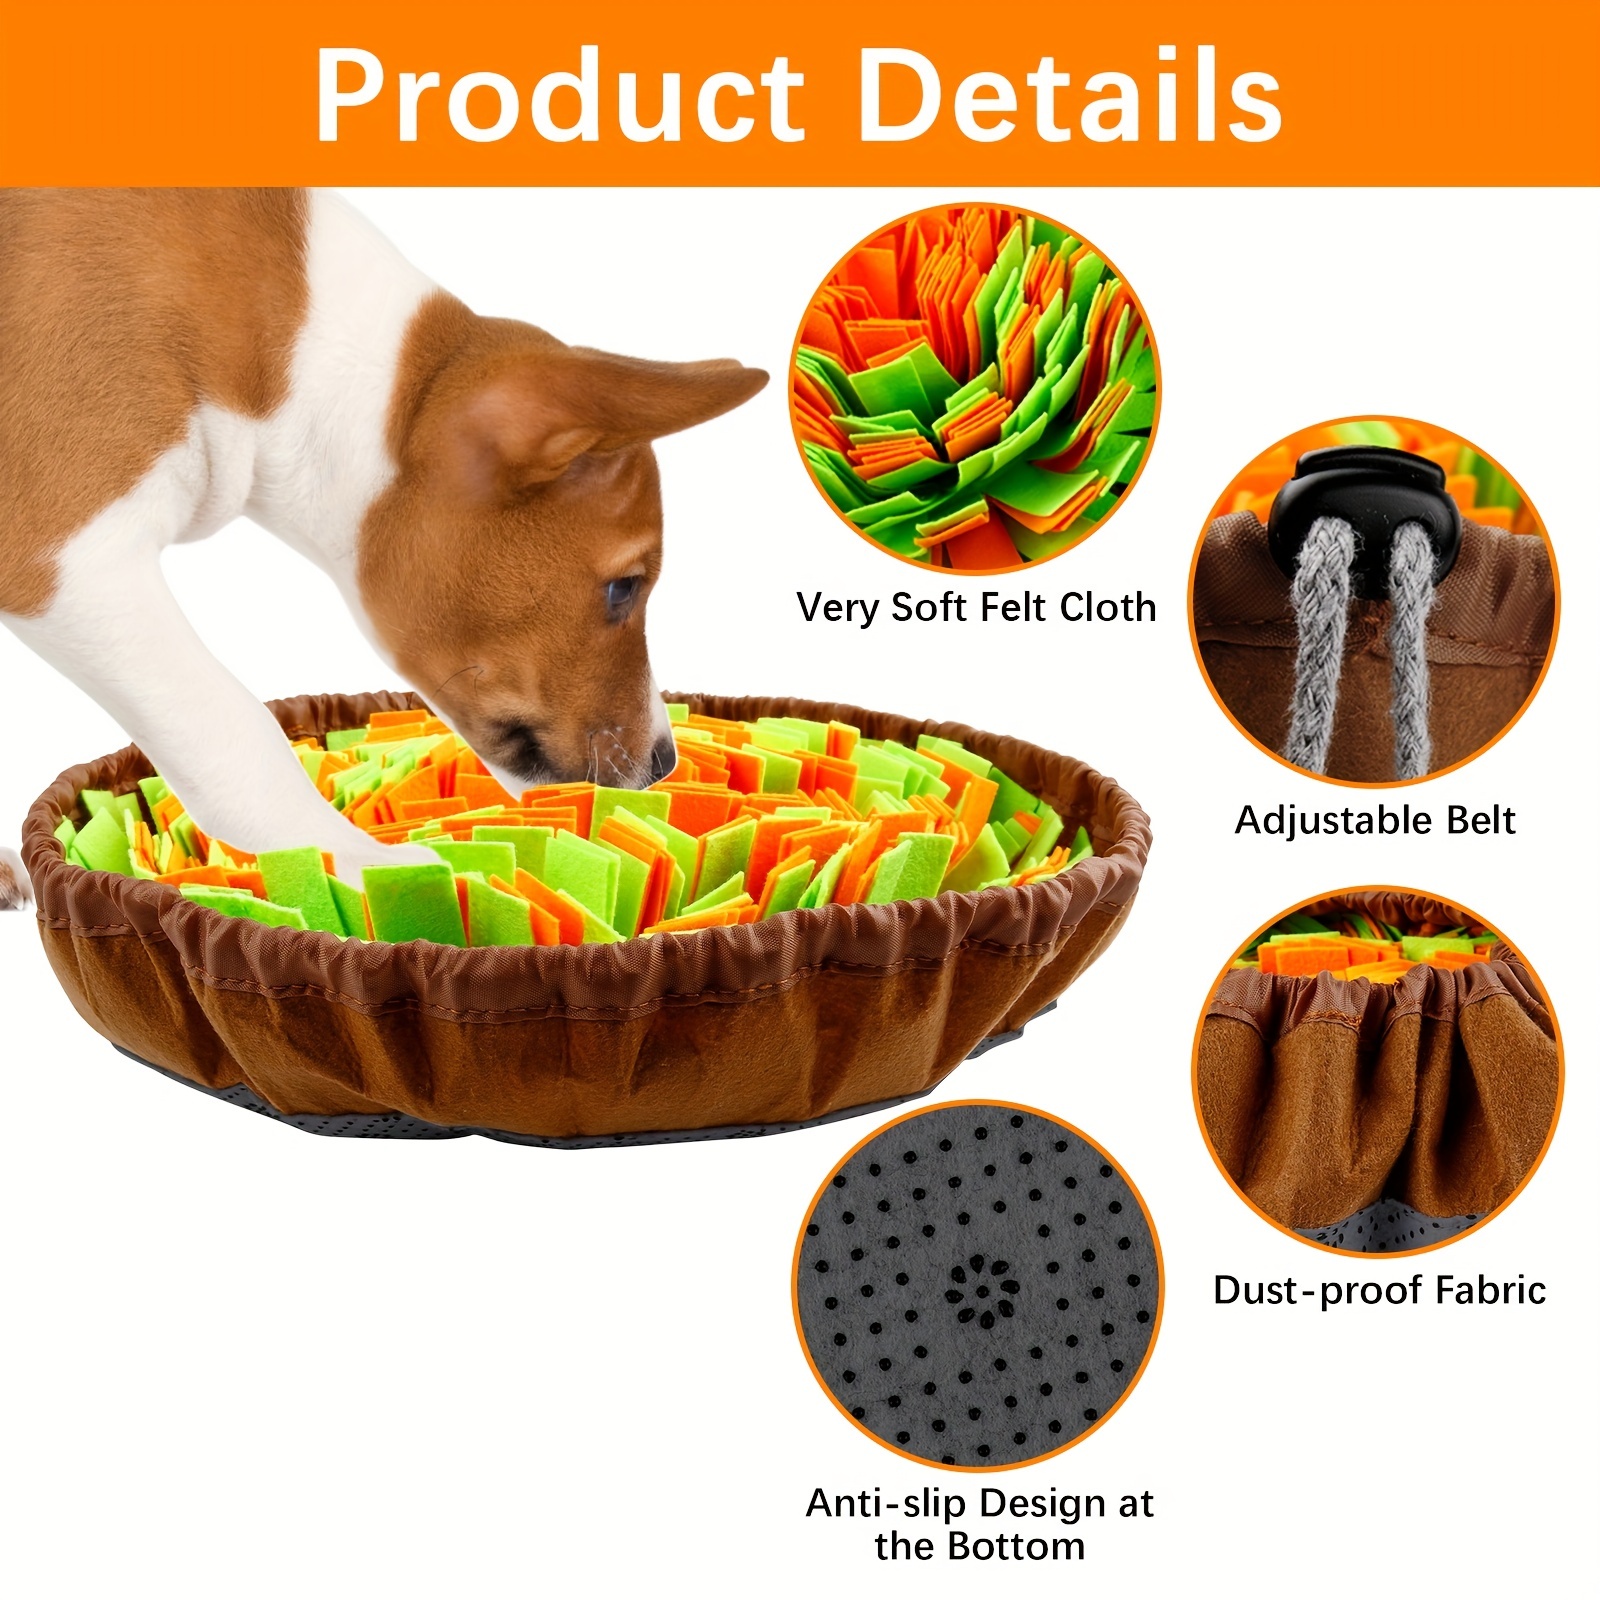 Large Snuffle Mat For Dogs - Interactive Puzzle Toy For Smart Dogs